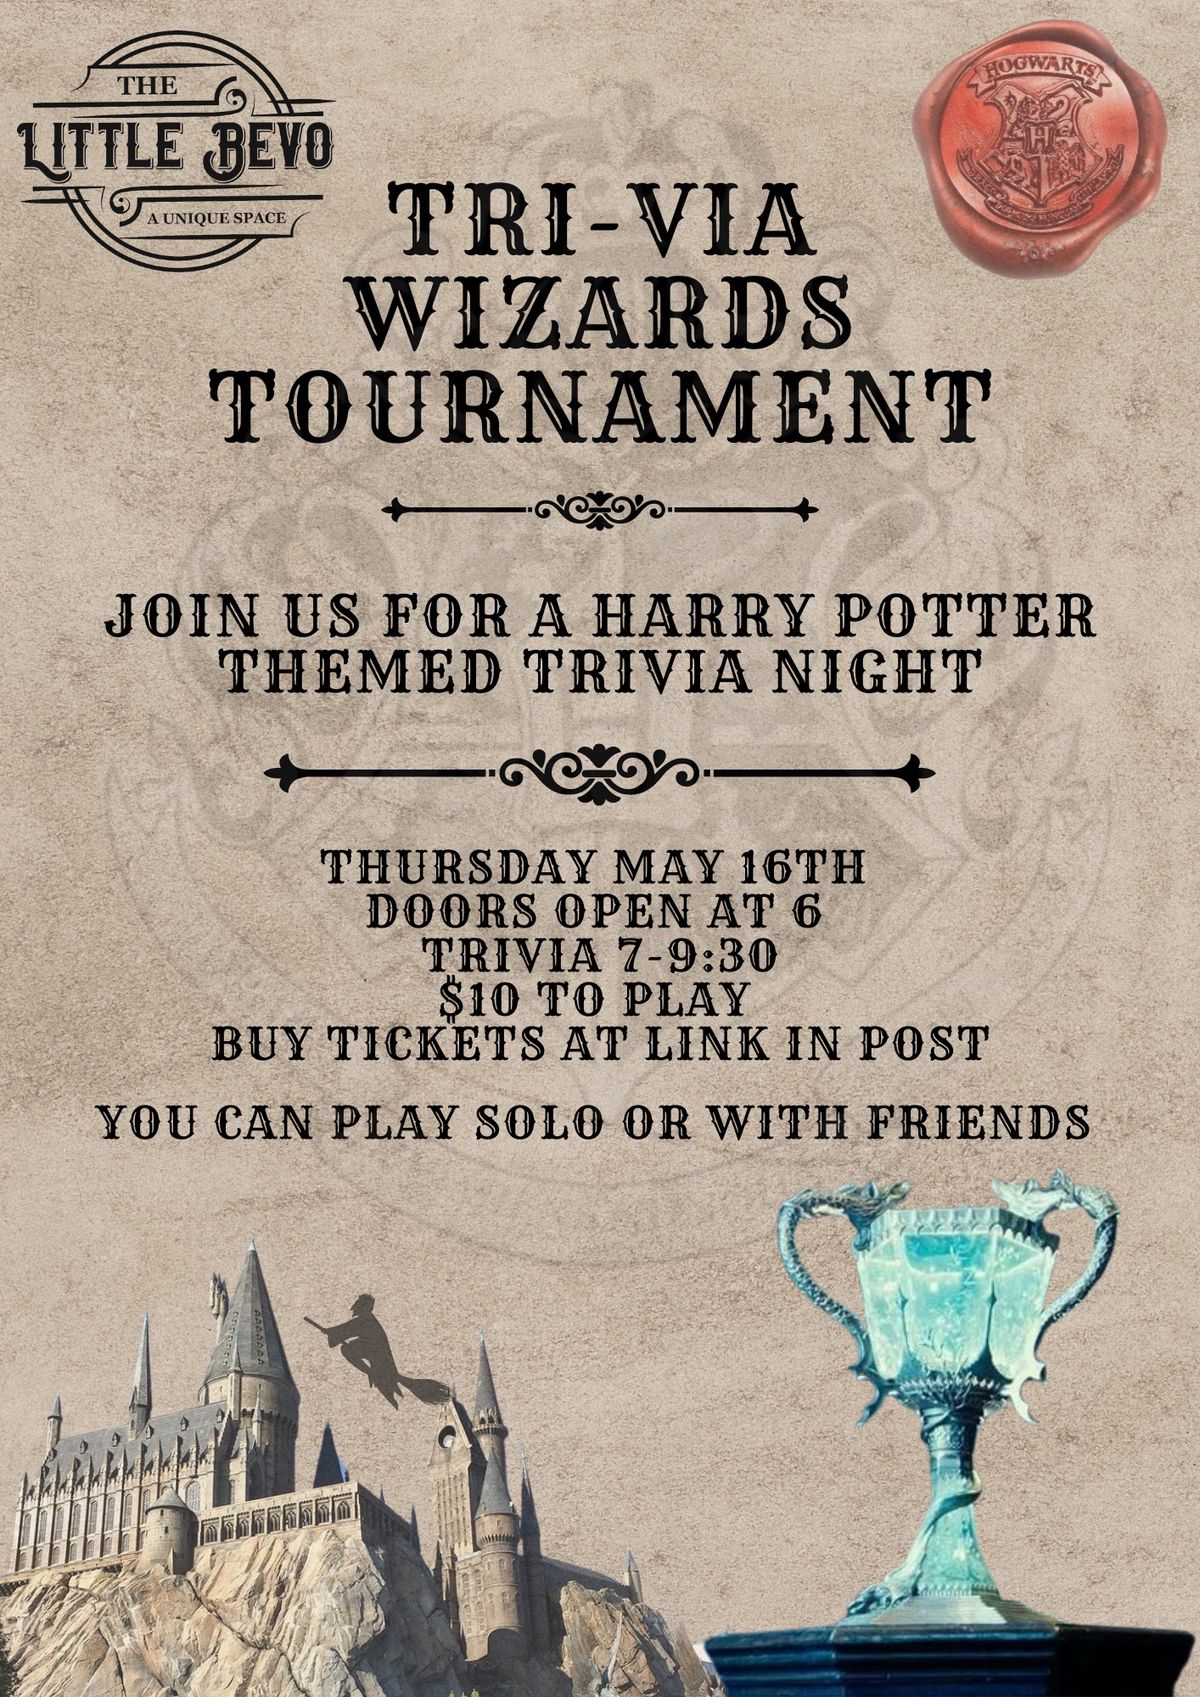 TRIvia Wizards Tournament: A Harry Potter Inspired Trivia Night 